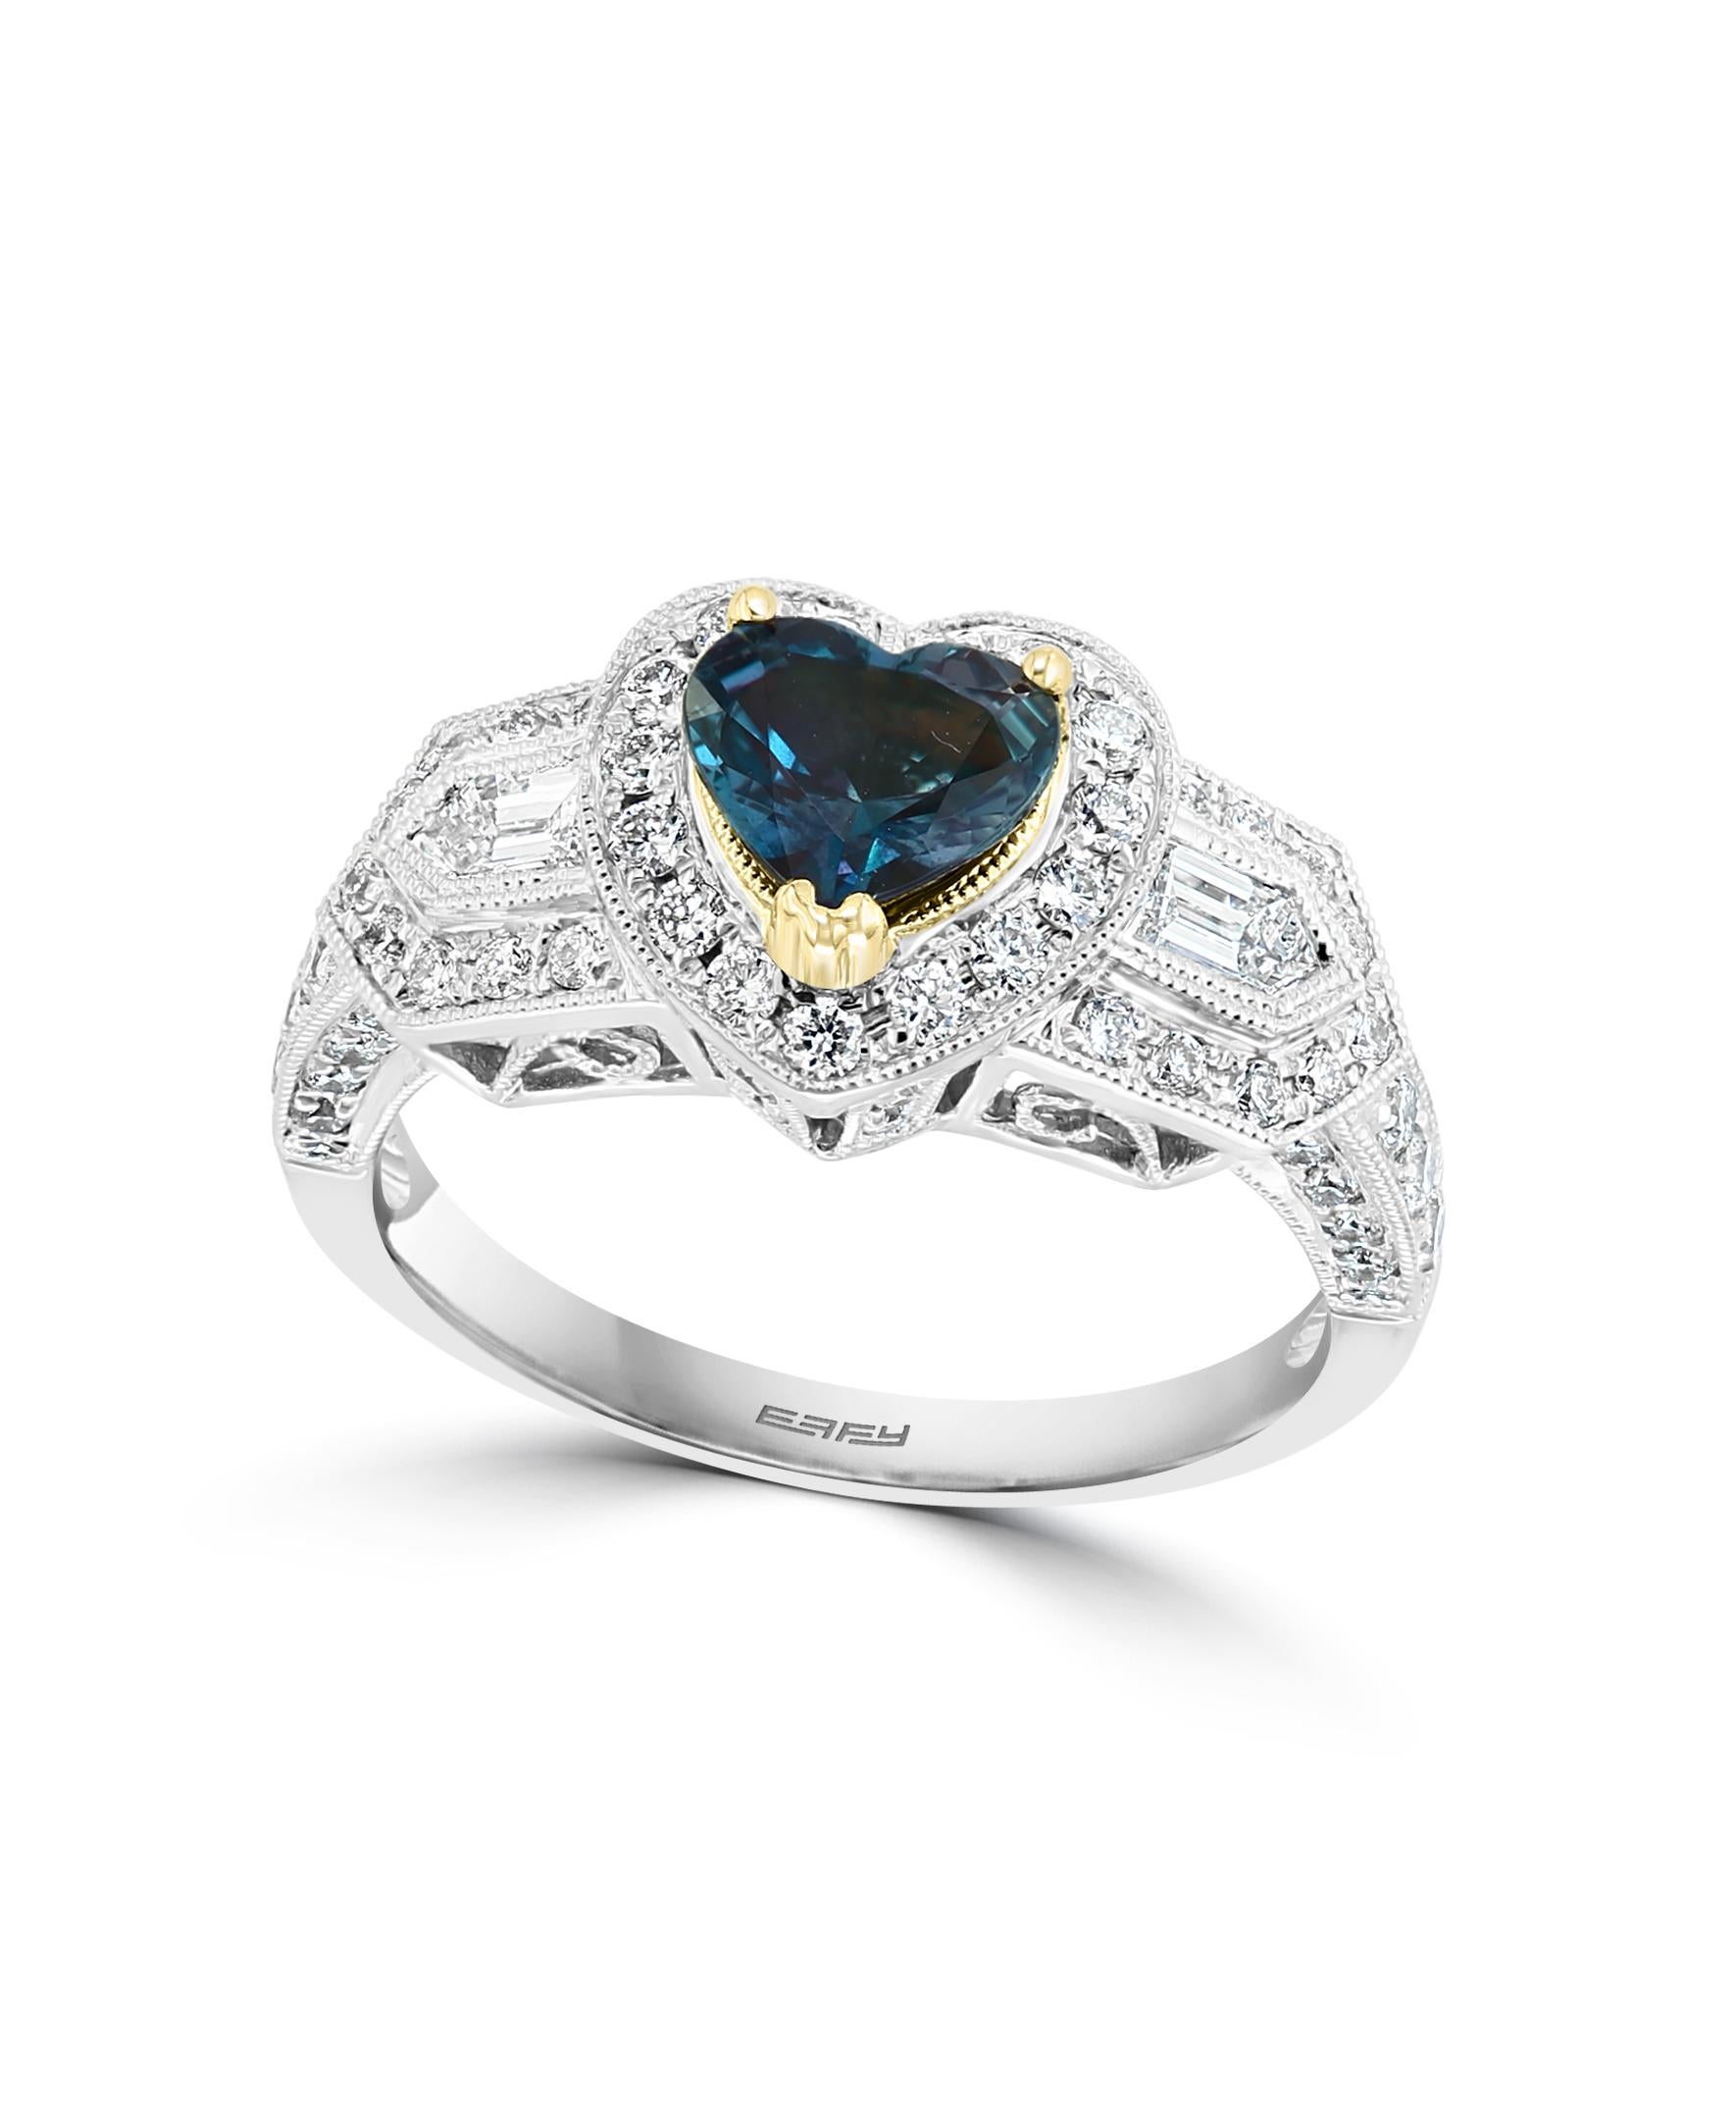 This exceptional Alexandrite stone is certified by Gubelin. It is a heart shape brilliant cut, and exhibits strong color change from bluish-green to purple.
This Effy Hematian ring is set in 18K White gold with 18K yellow gold prongs holding the